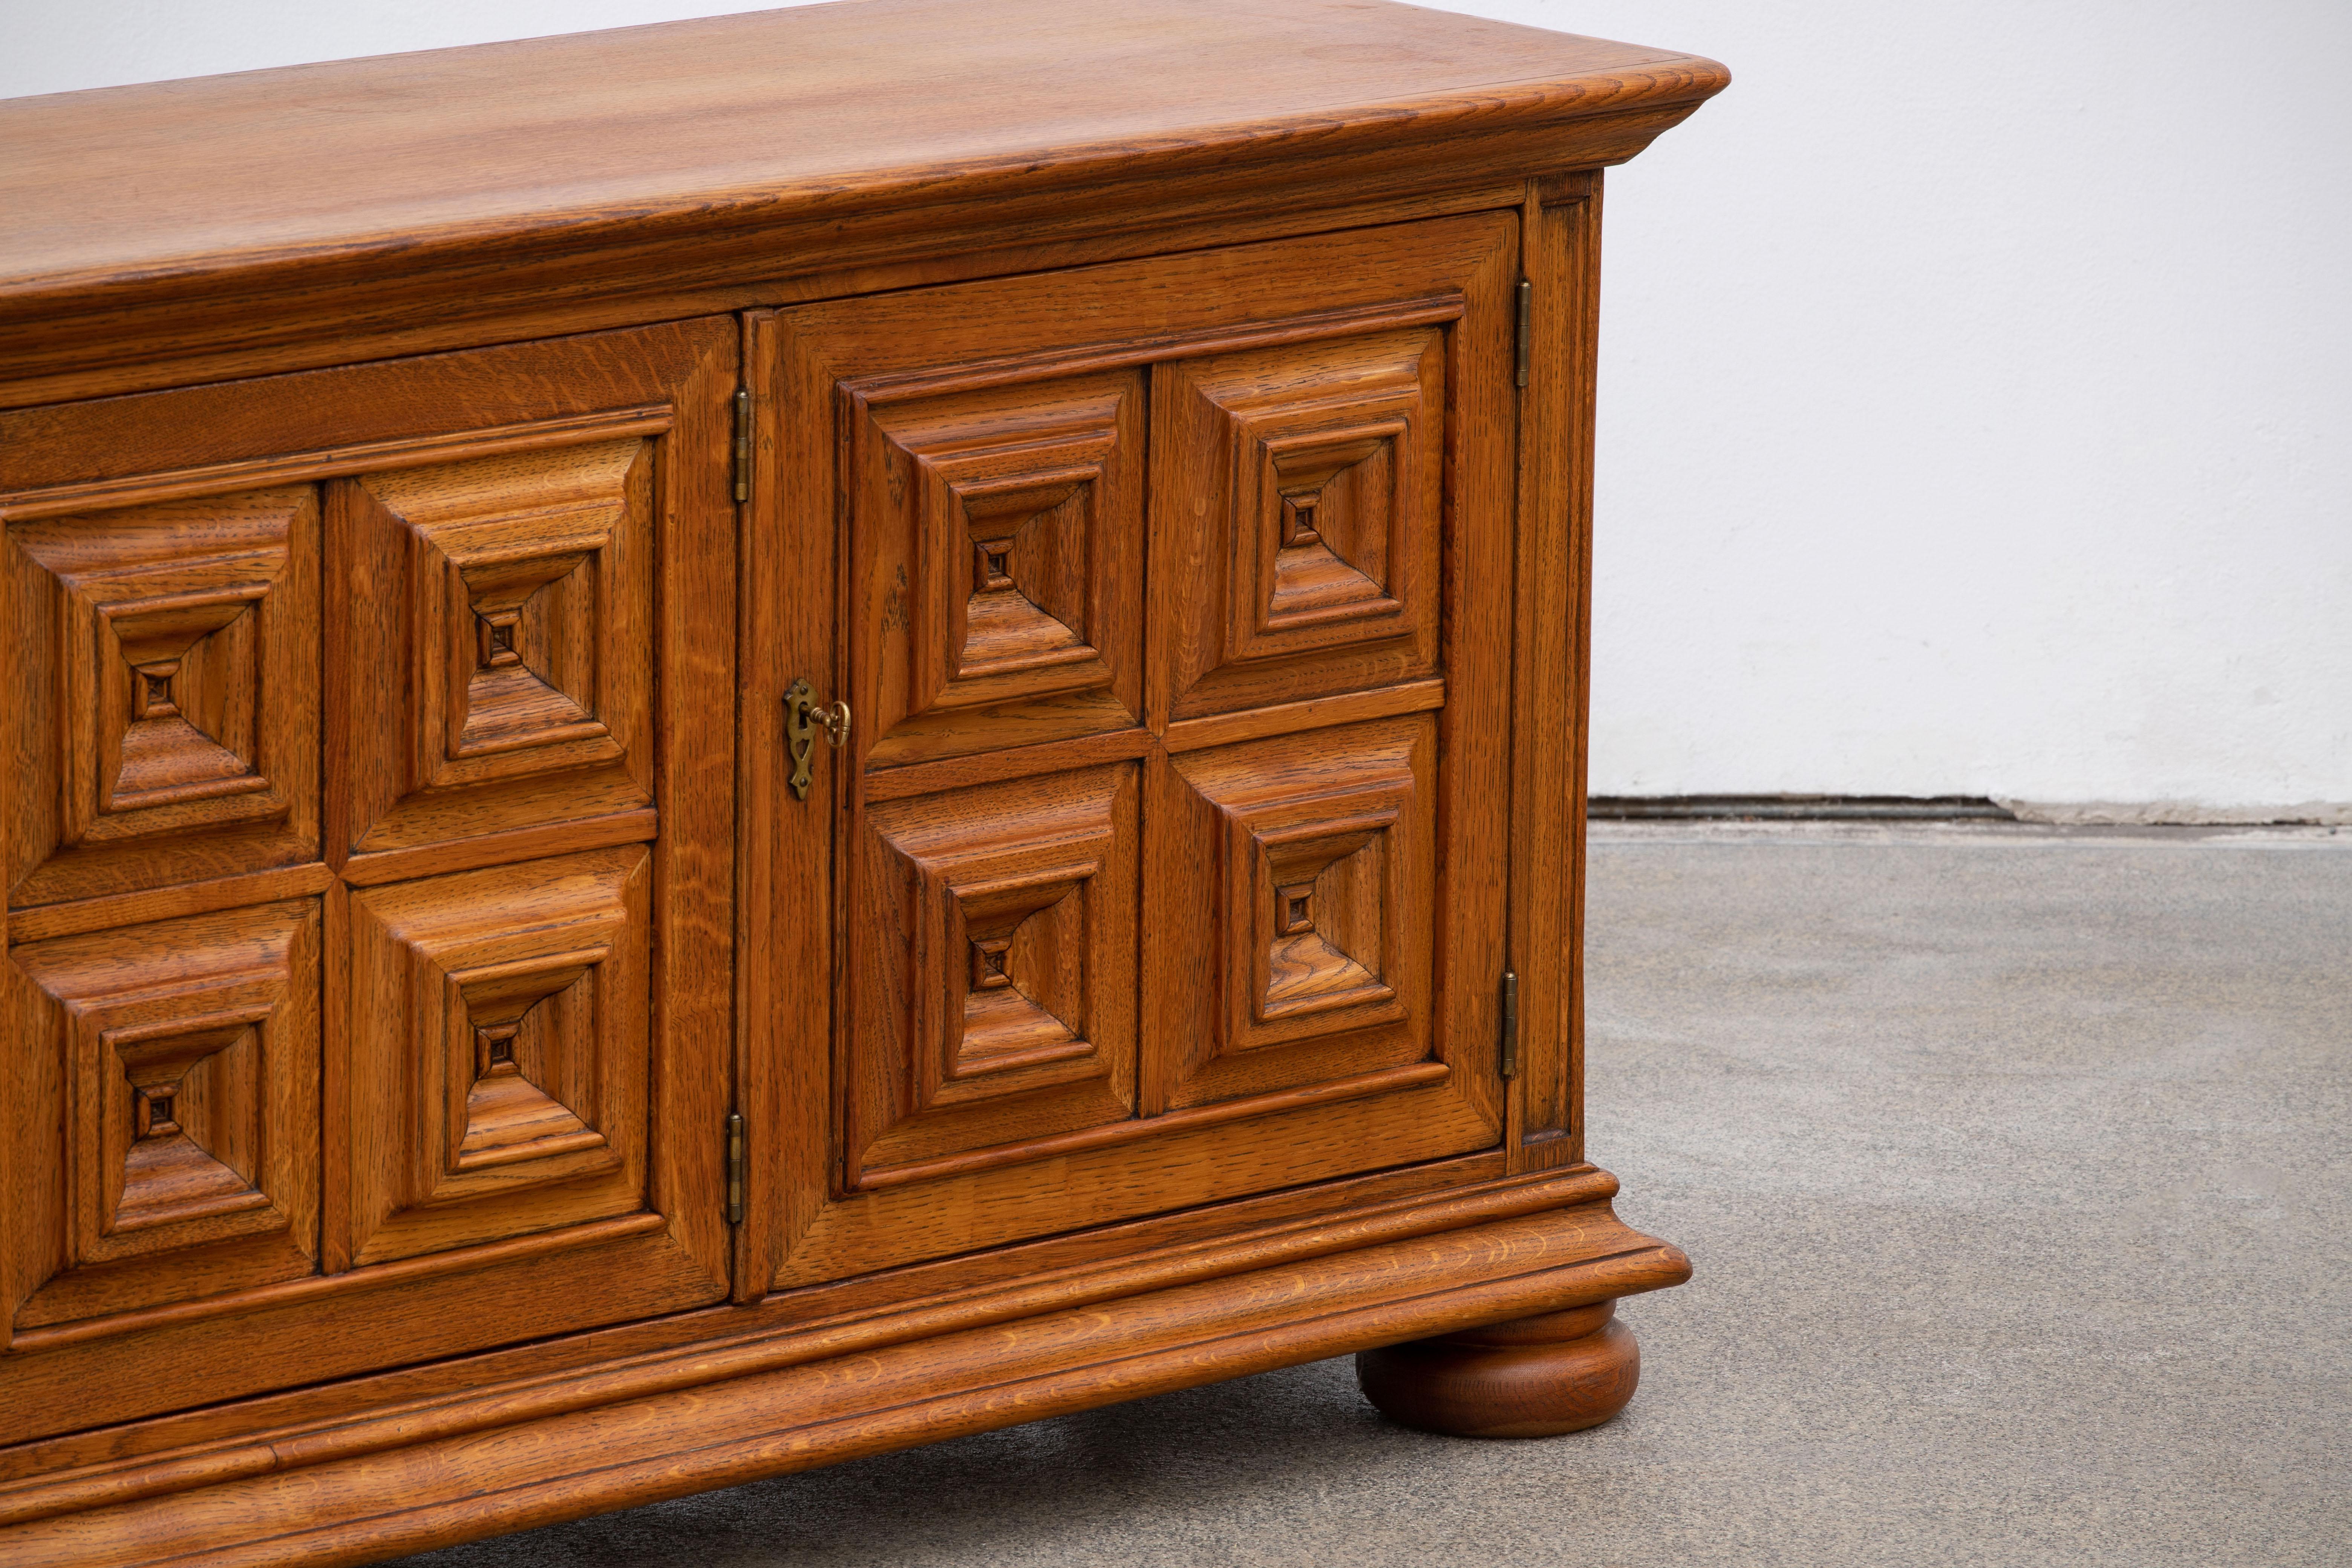 Mid-20th Century Brutalist Solid Oak Sideboard, Spanish Colonial, 1940s